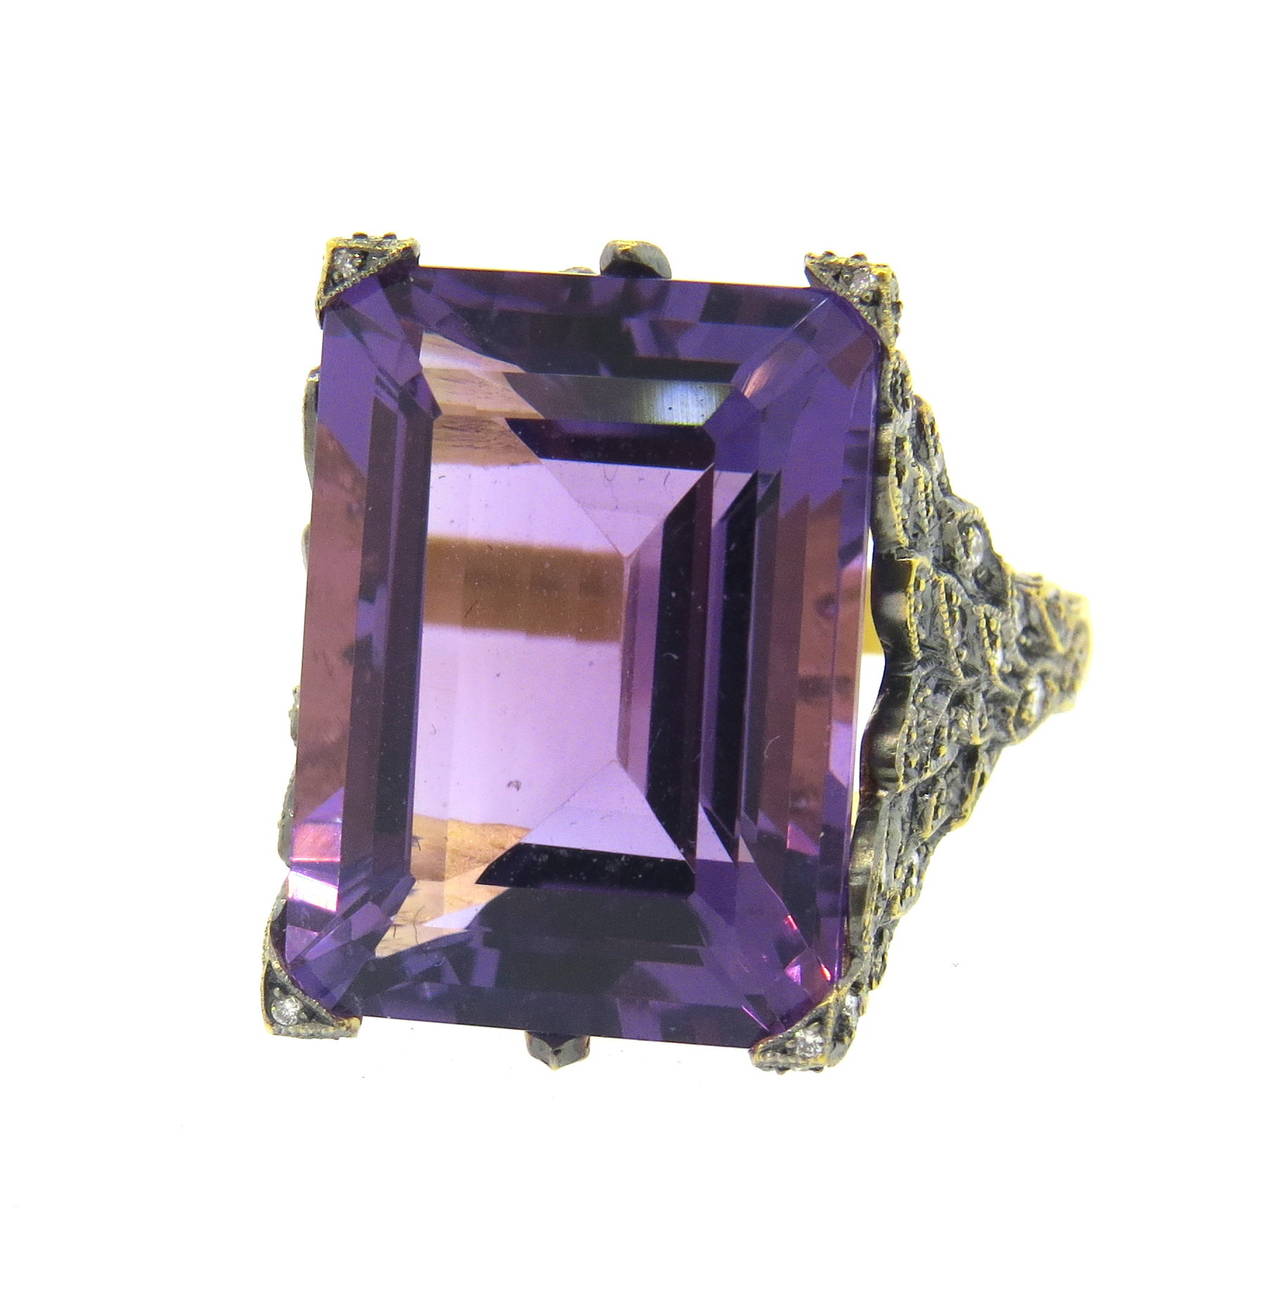 22k gold Cathy Waterman ring from Peacock collection, set with approx. 20ct amethyst, surrounded with diamonds. Ring size 8 3/4, ring top is 21mm x 15mm. Marked with maker's mark and 22k. Weight of the piece - 14.7 grams